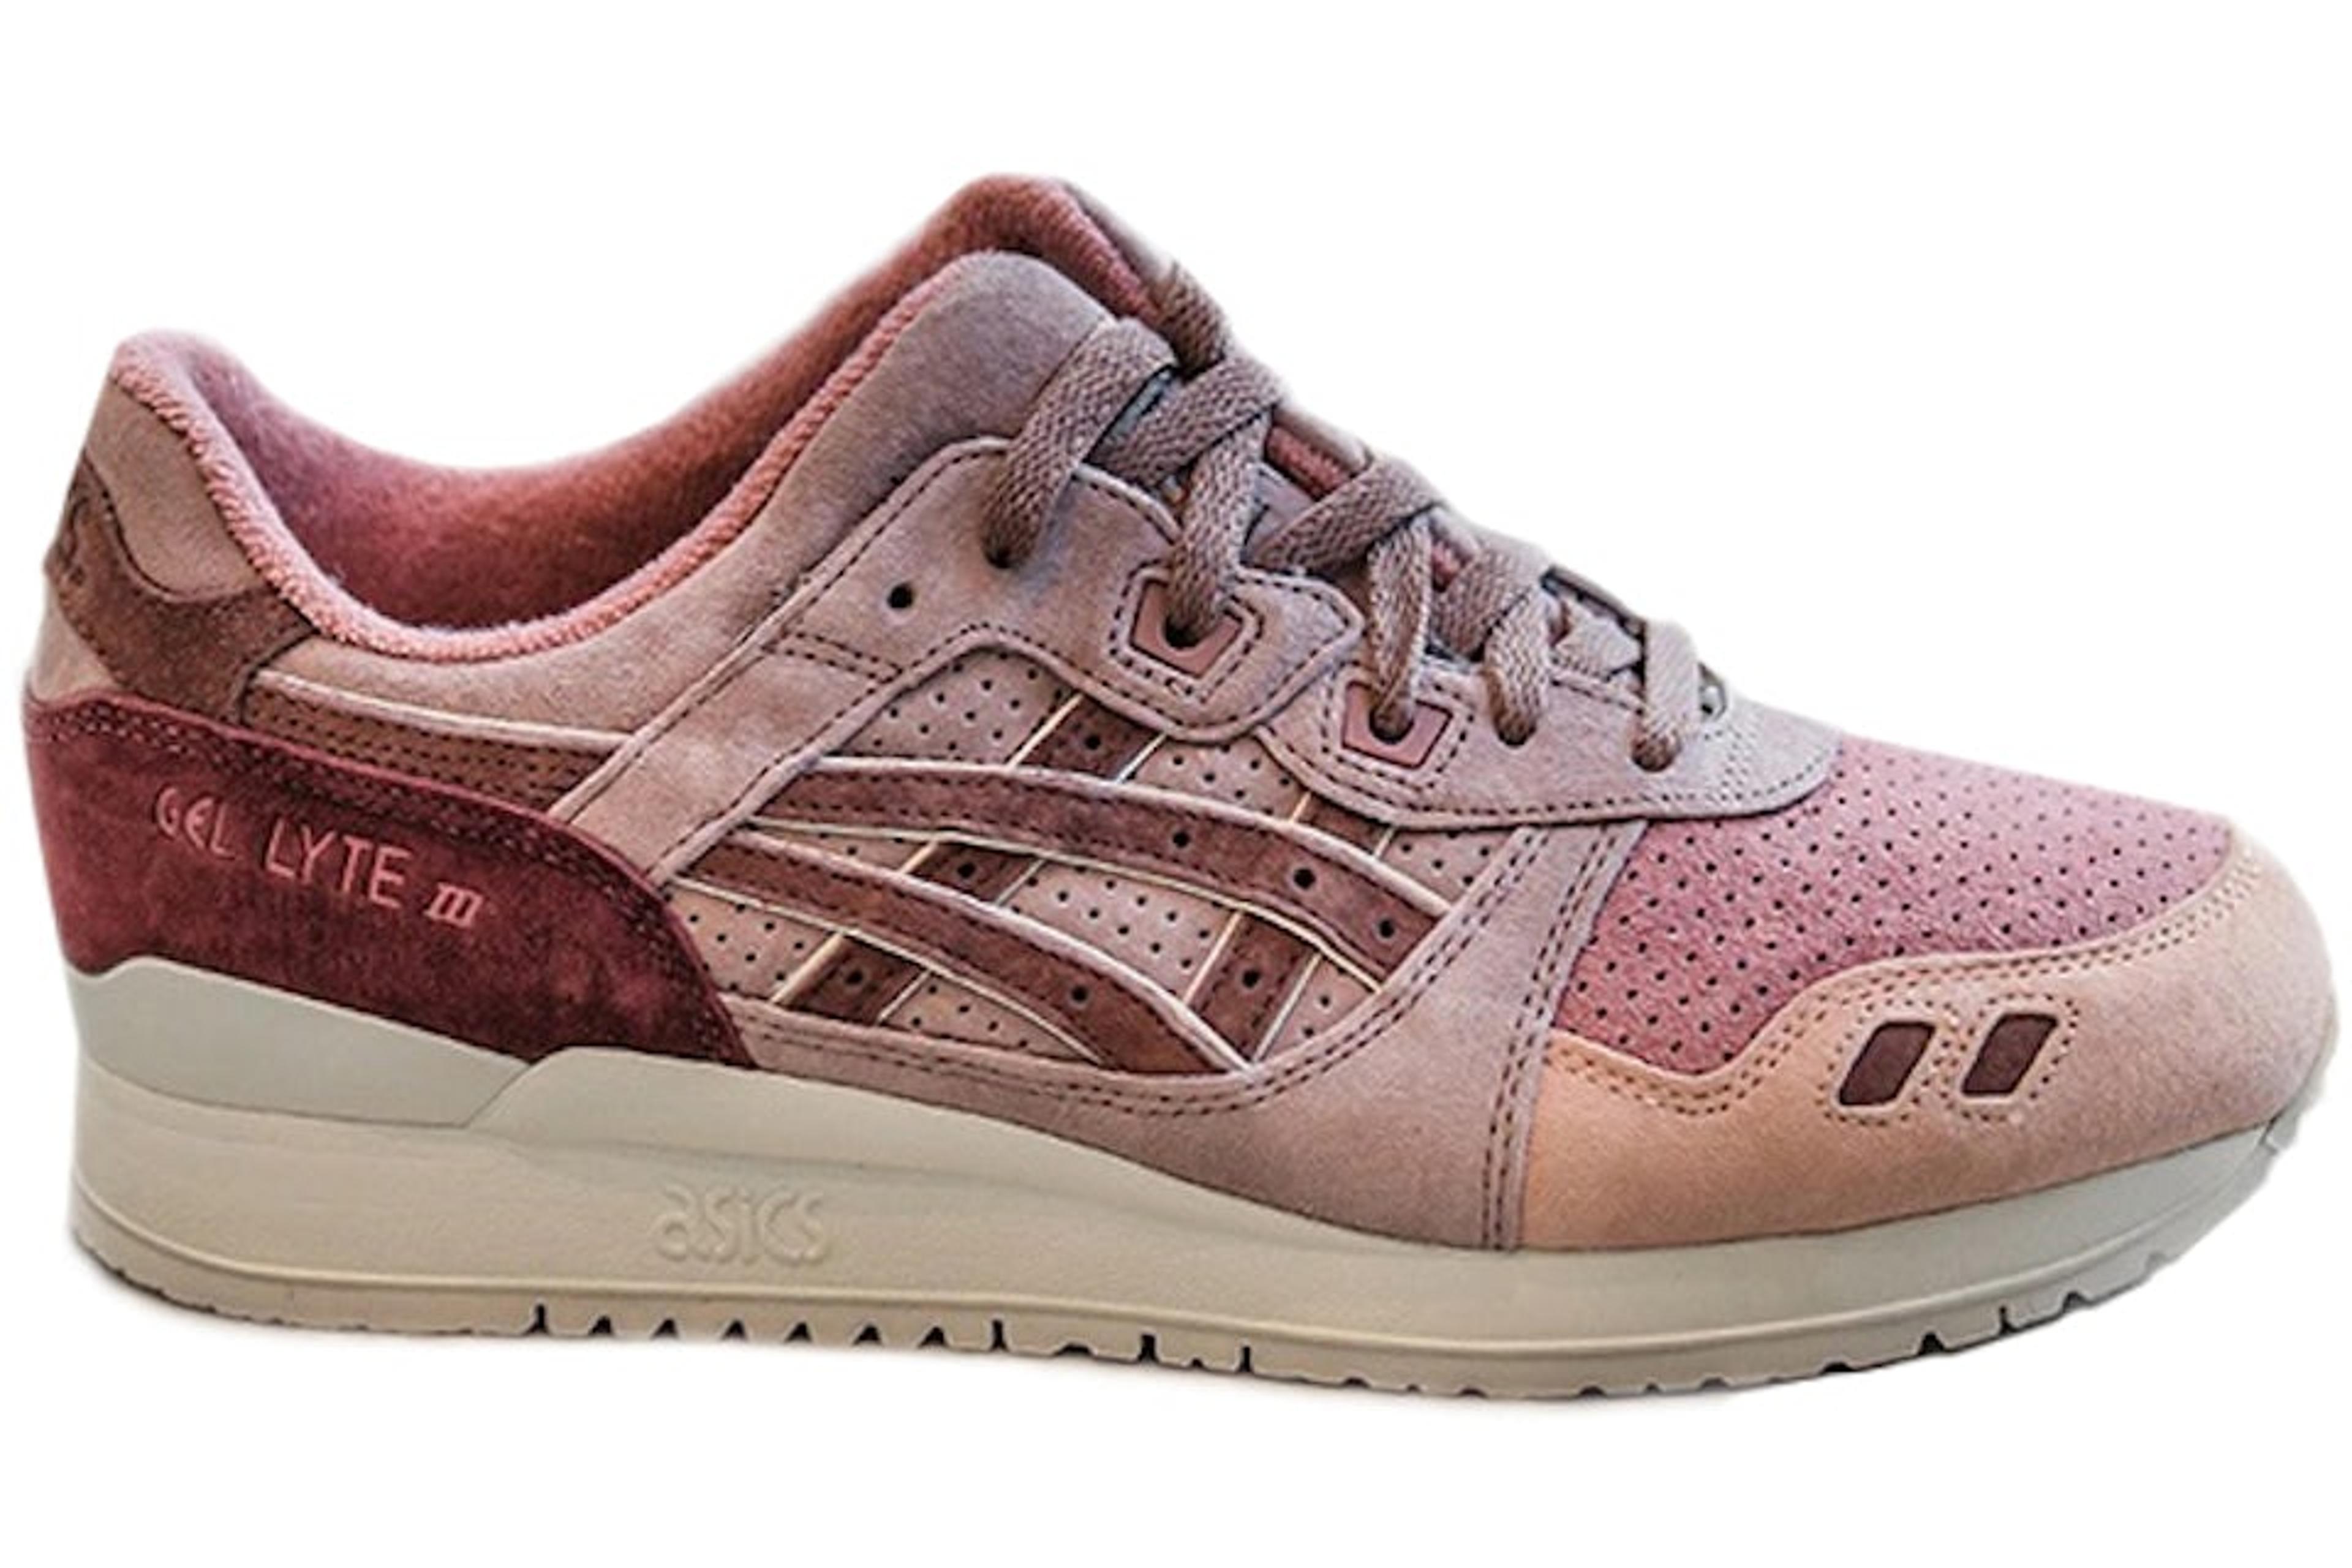 ASICS Gel-Lyte III '07 Blush Remastered Kith By Invitation Only